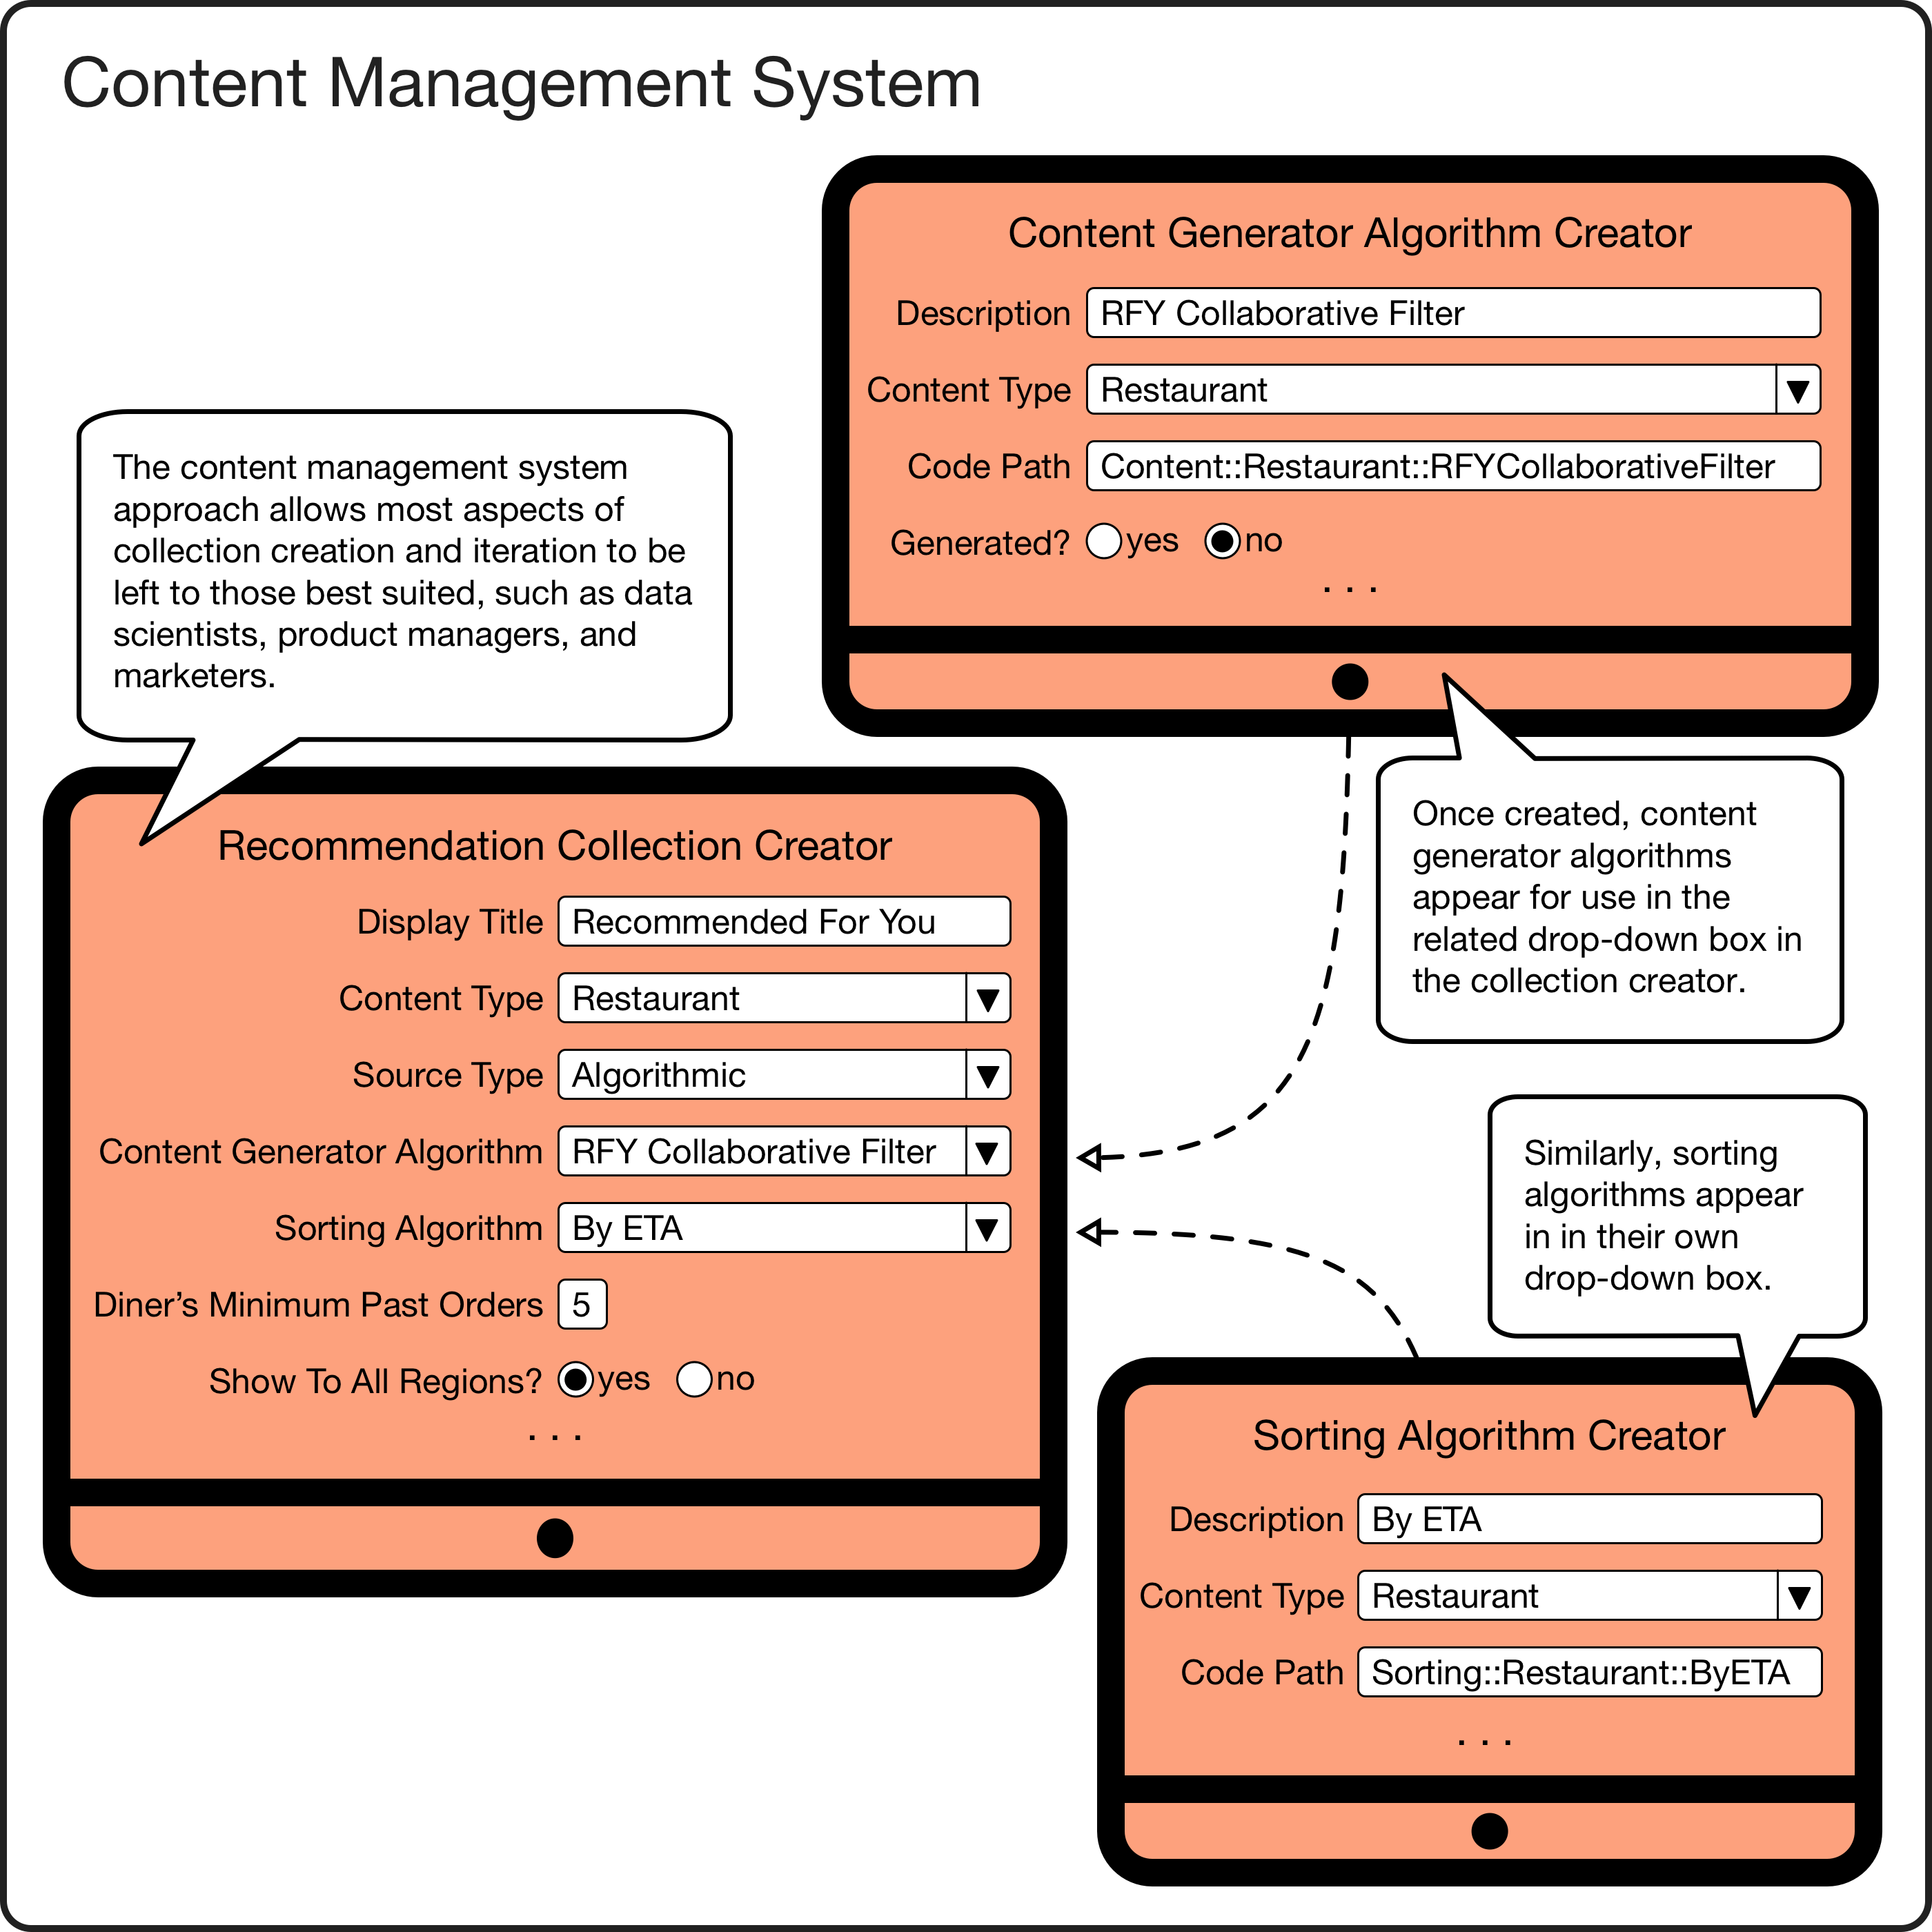 Content management system examples.